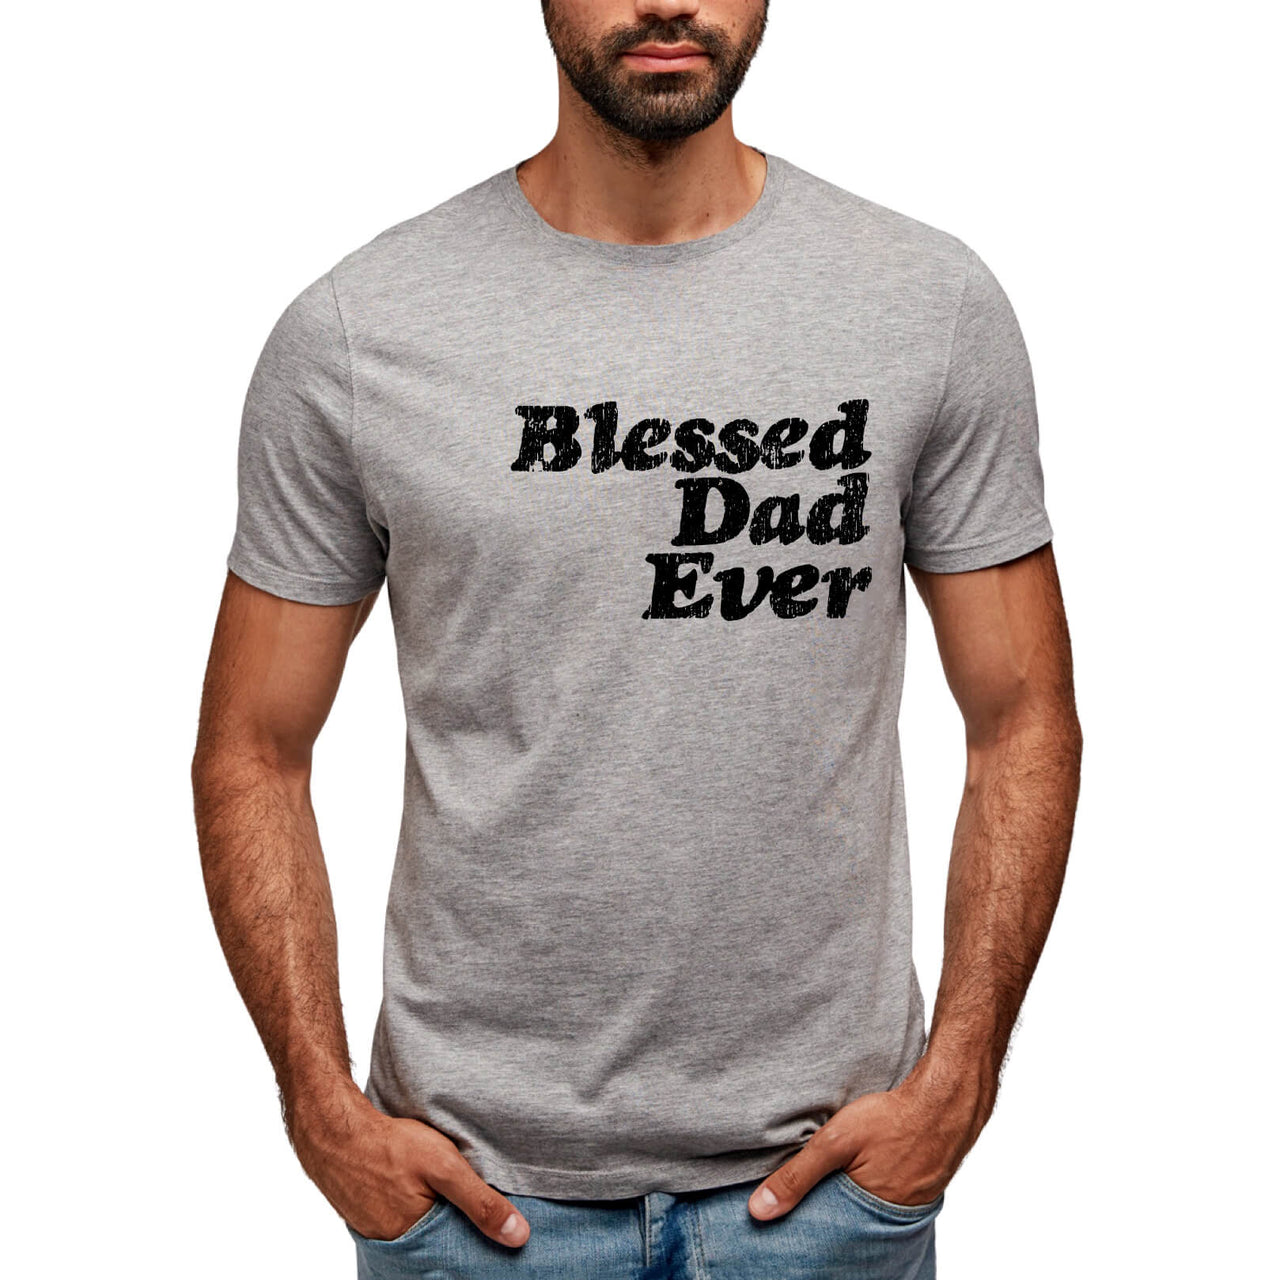 Blessed Dad Ever Men's T-Shirt